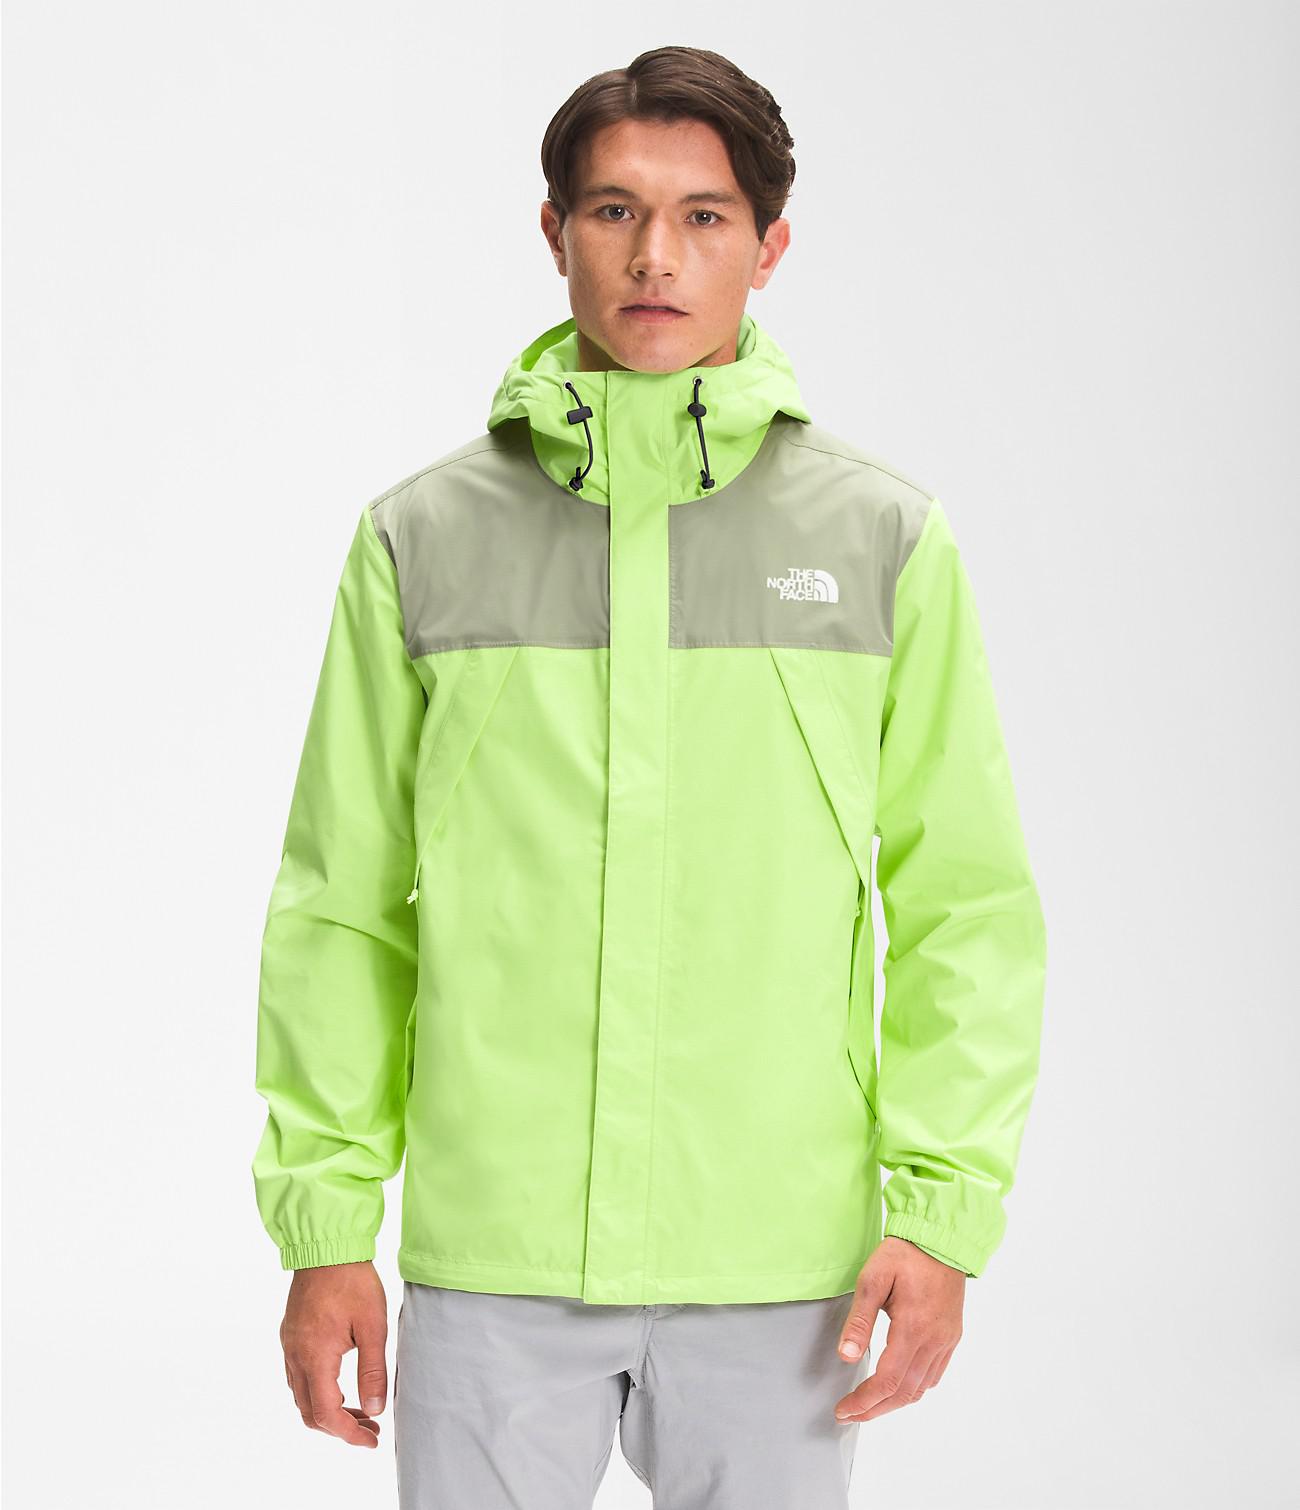 Men’s Antora Jacket by THE NORTH FACE